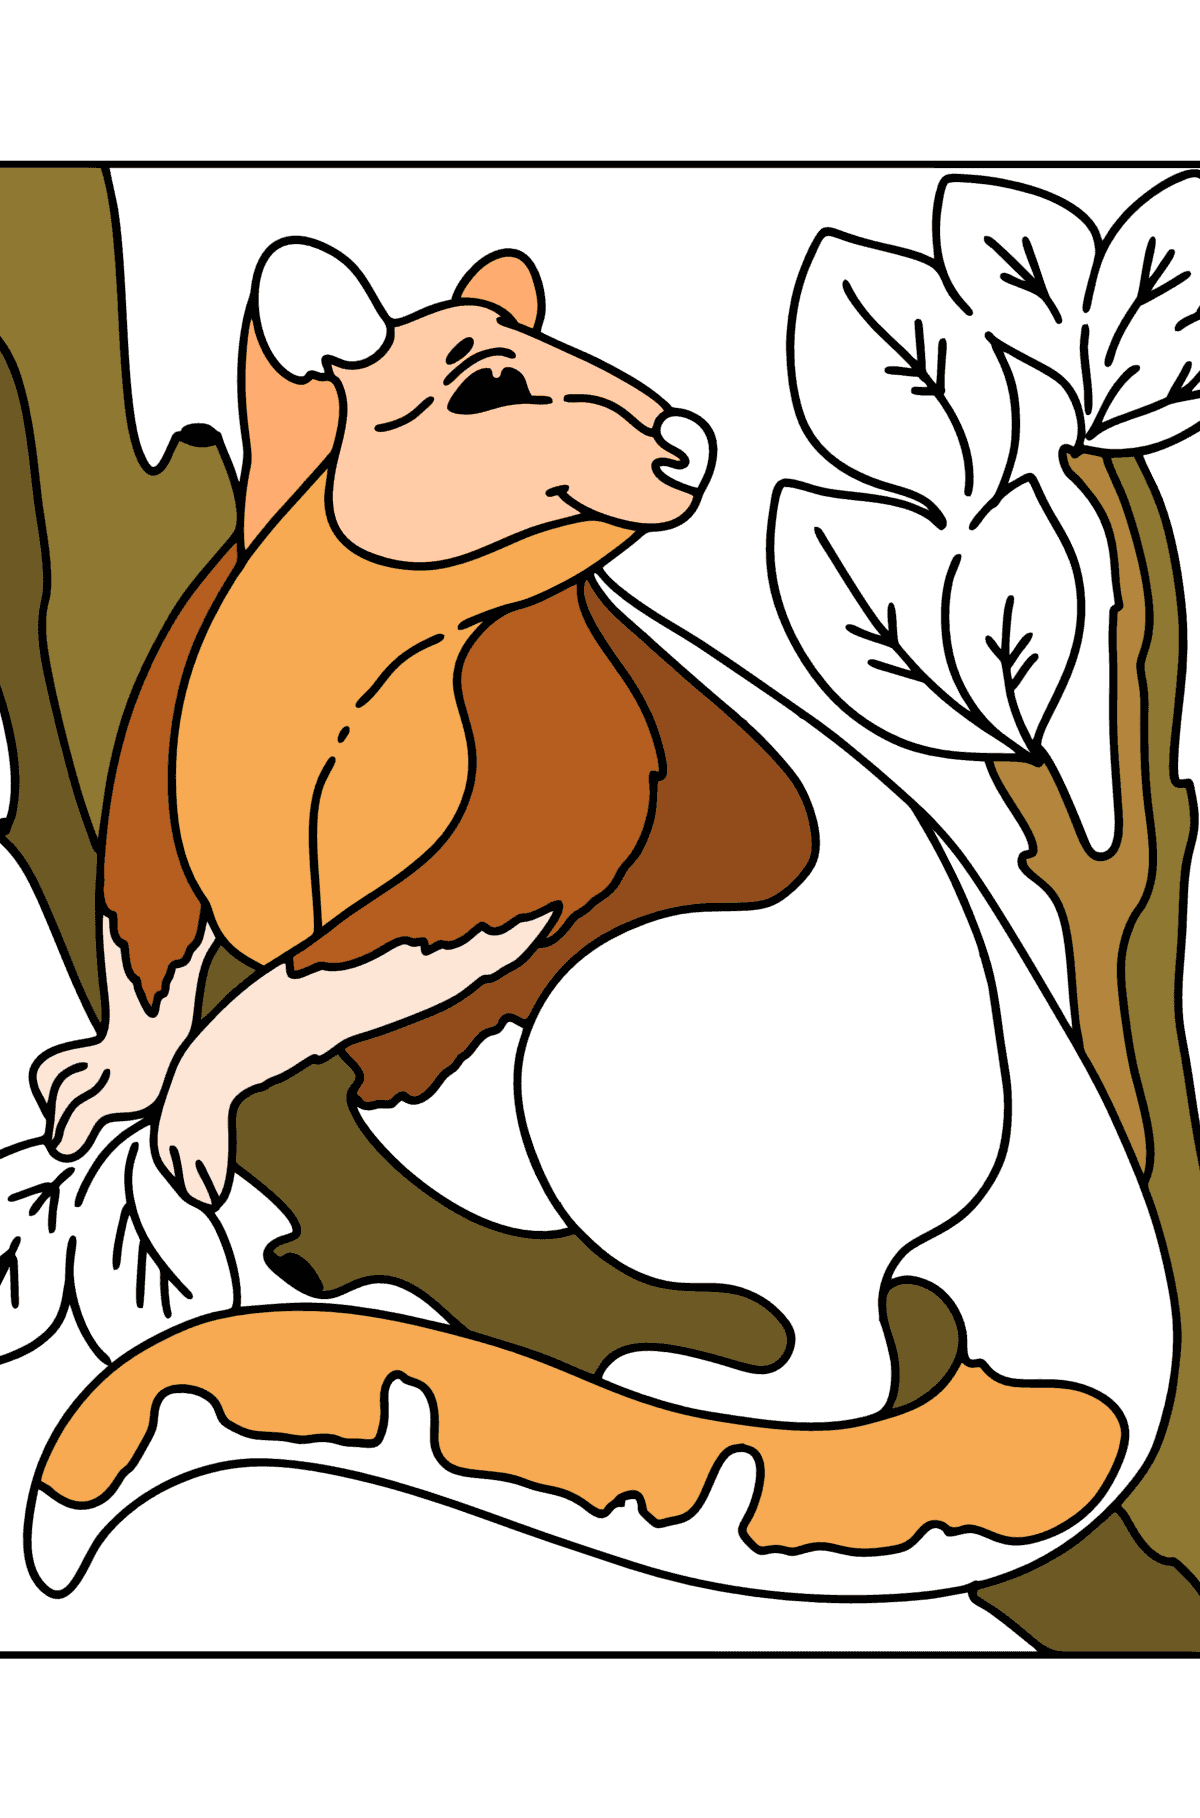 Coloring page - Tree Kangaroo - Coloring Pages for Kids